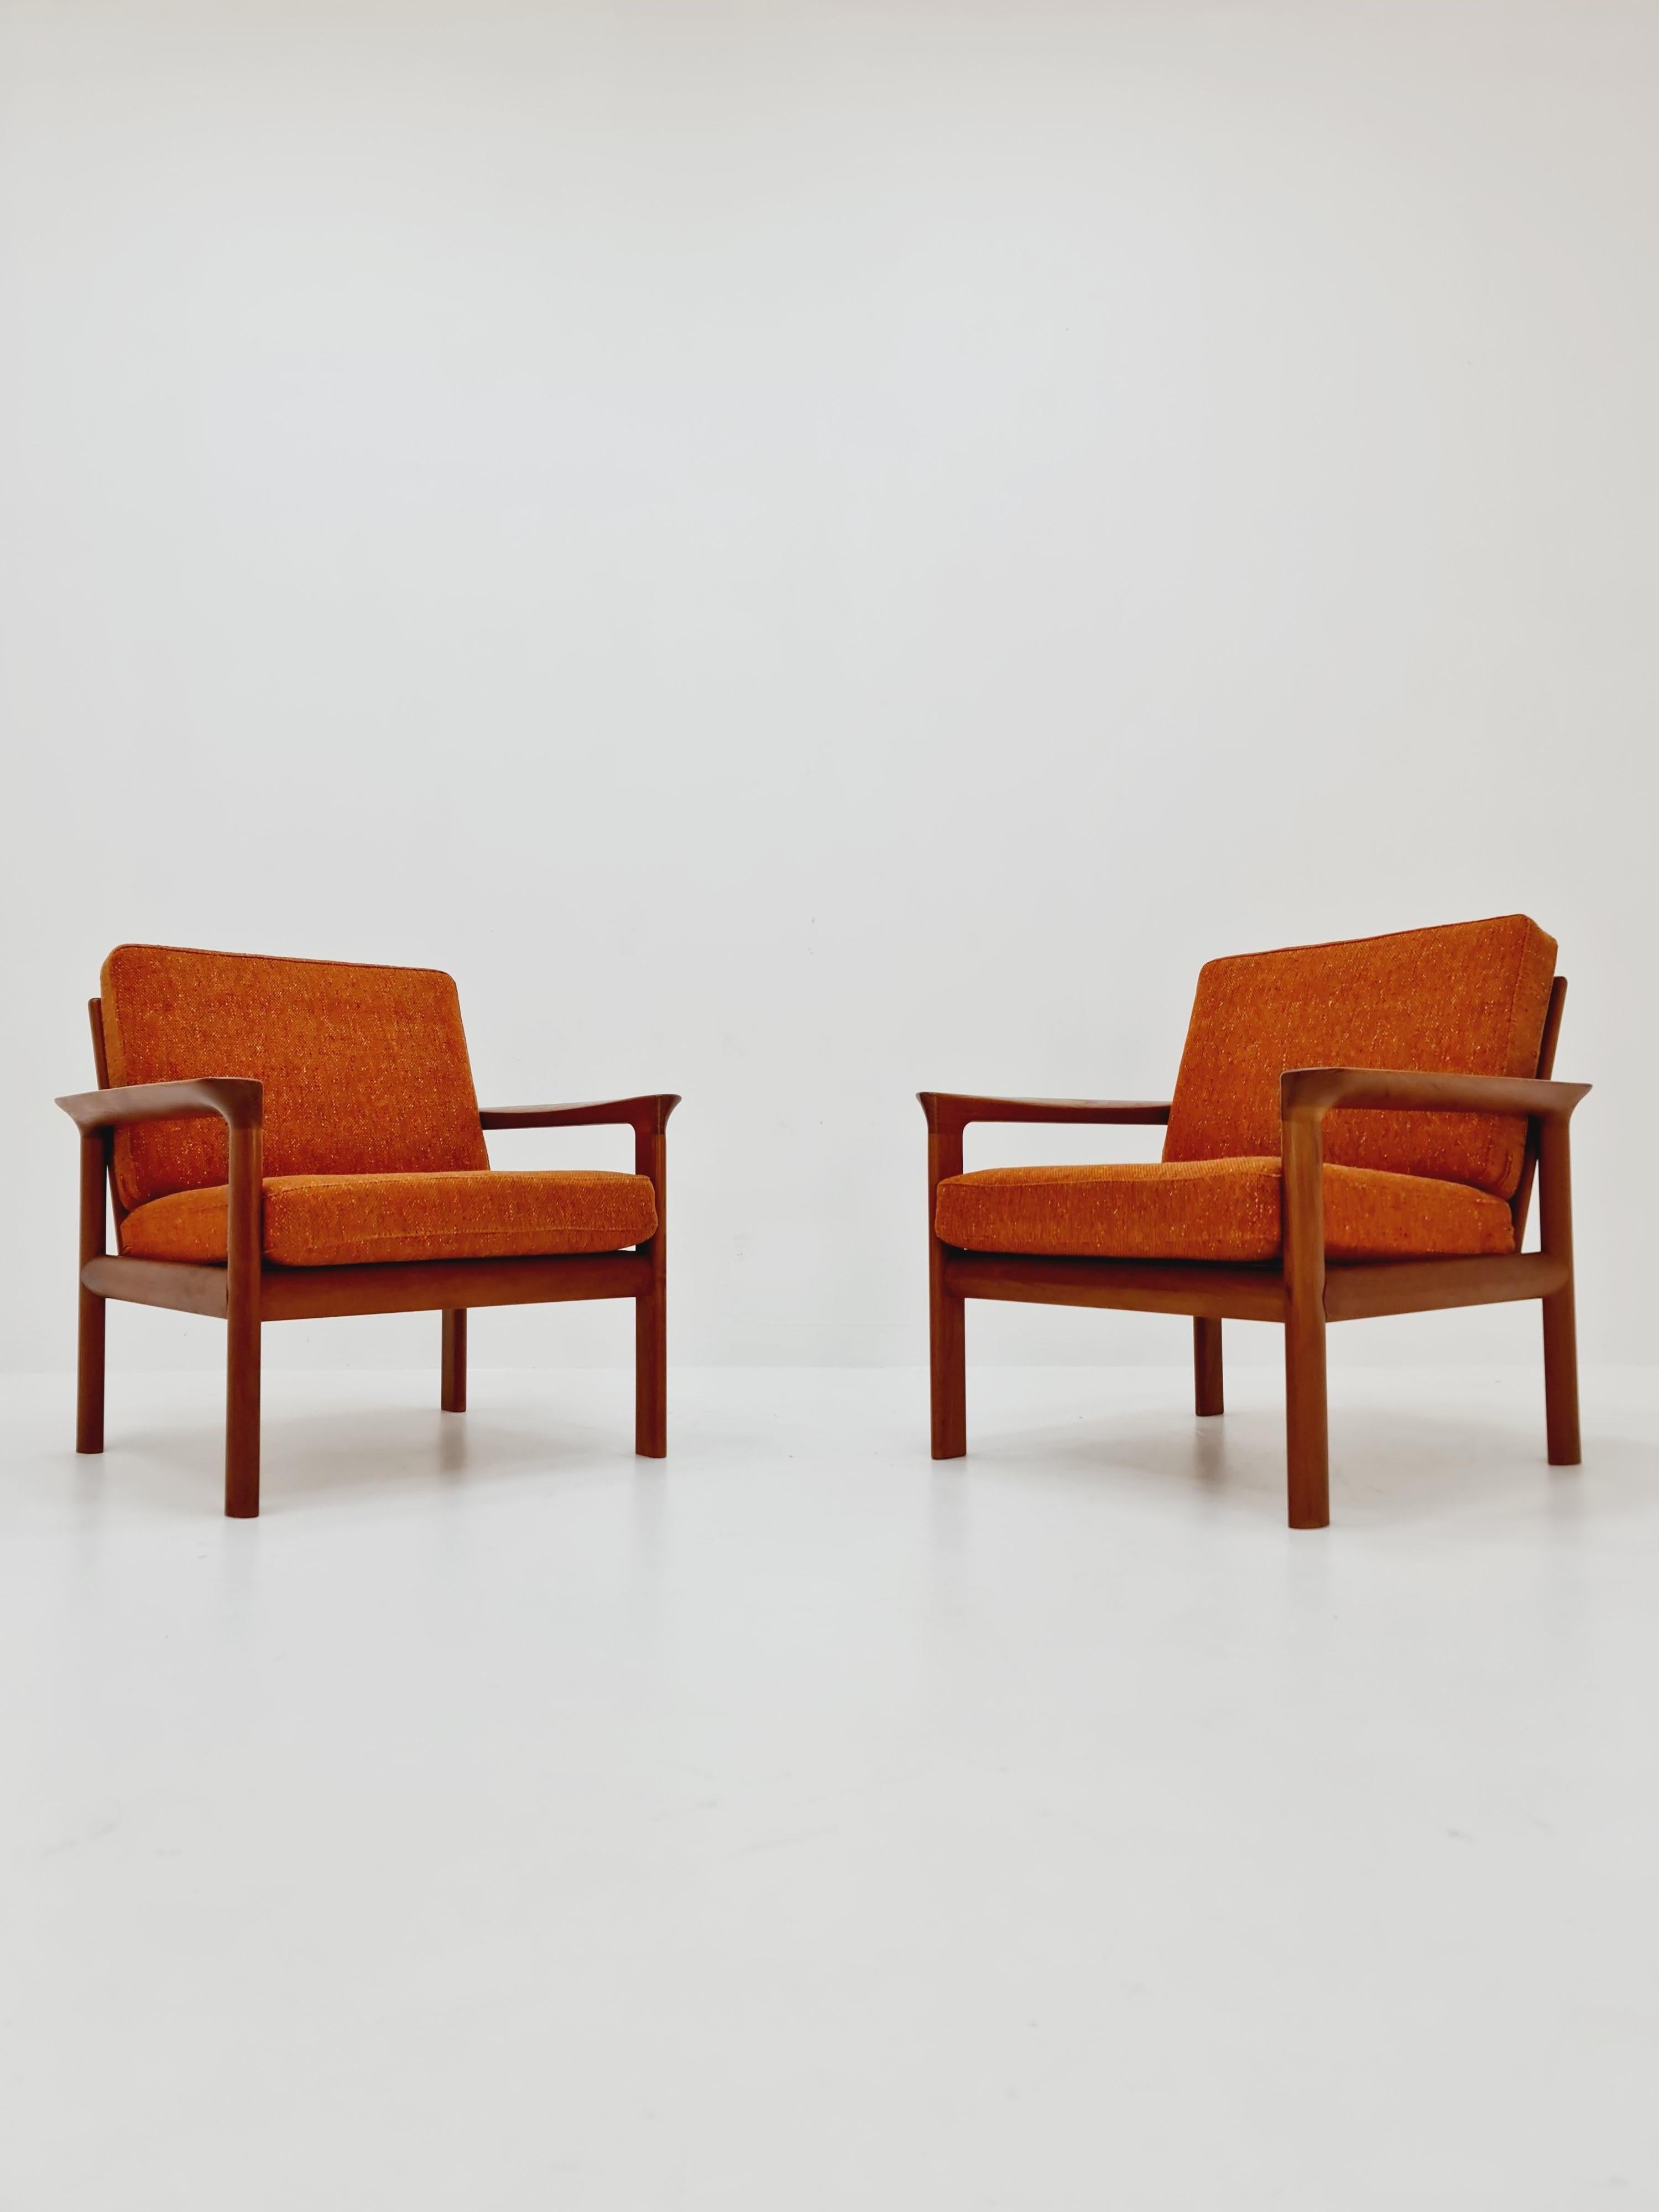 Mid century teak easy lounge chairs by Sven Ellekaer for Komfort, Set of 2, 1960s


It is in great condition. However, as with all the vintage items some minor wear marks should be expected. The upholstery is in good condition and the chairs are